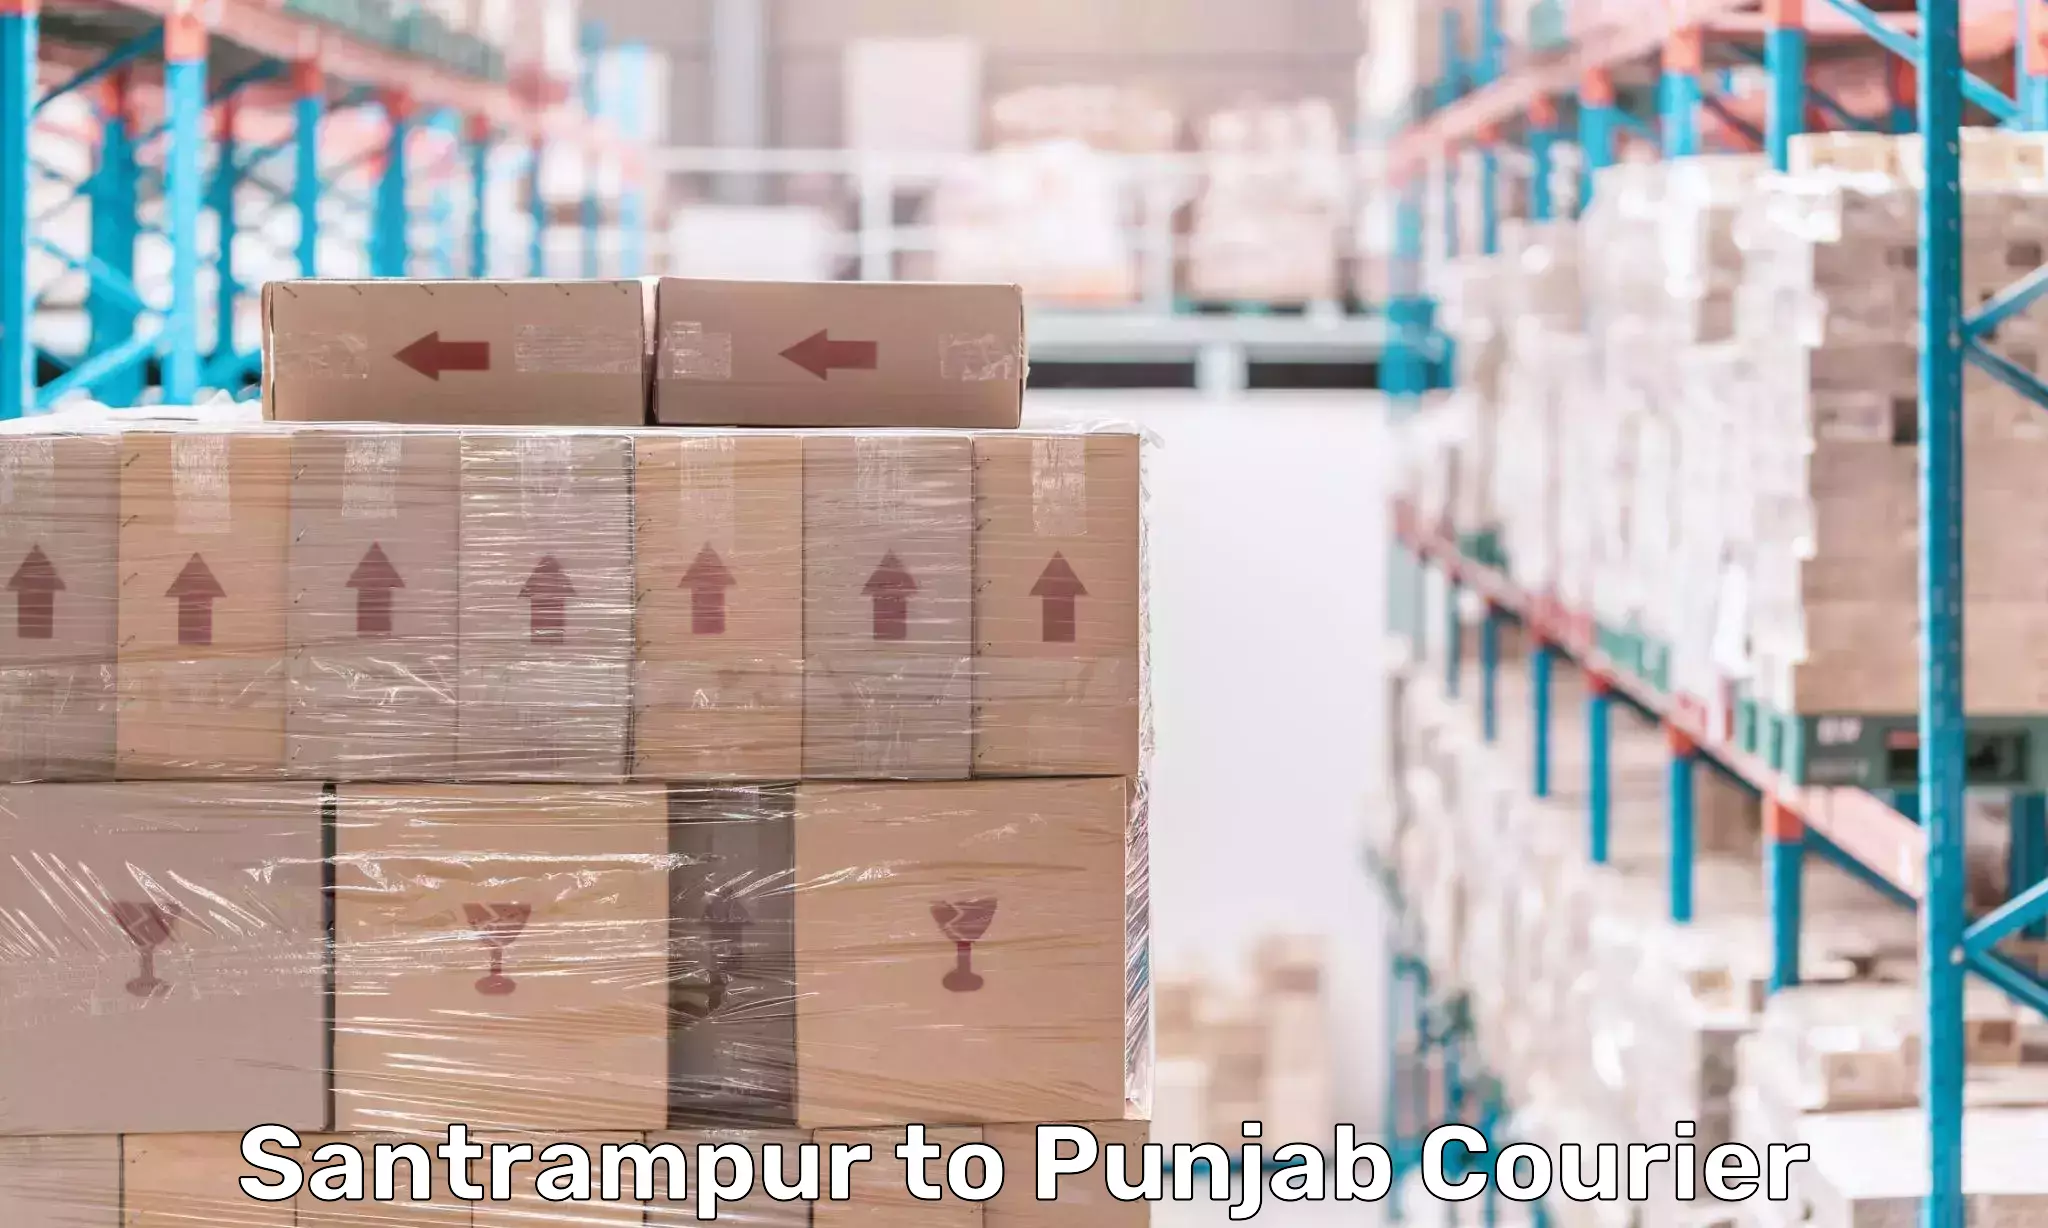 Overnight delivery services in Santrampur to Punjab